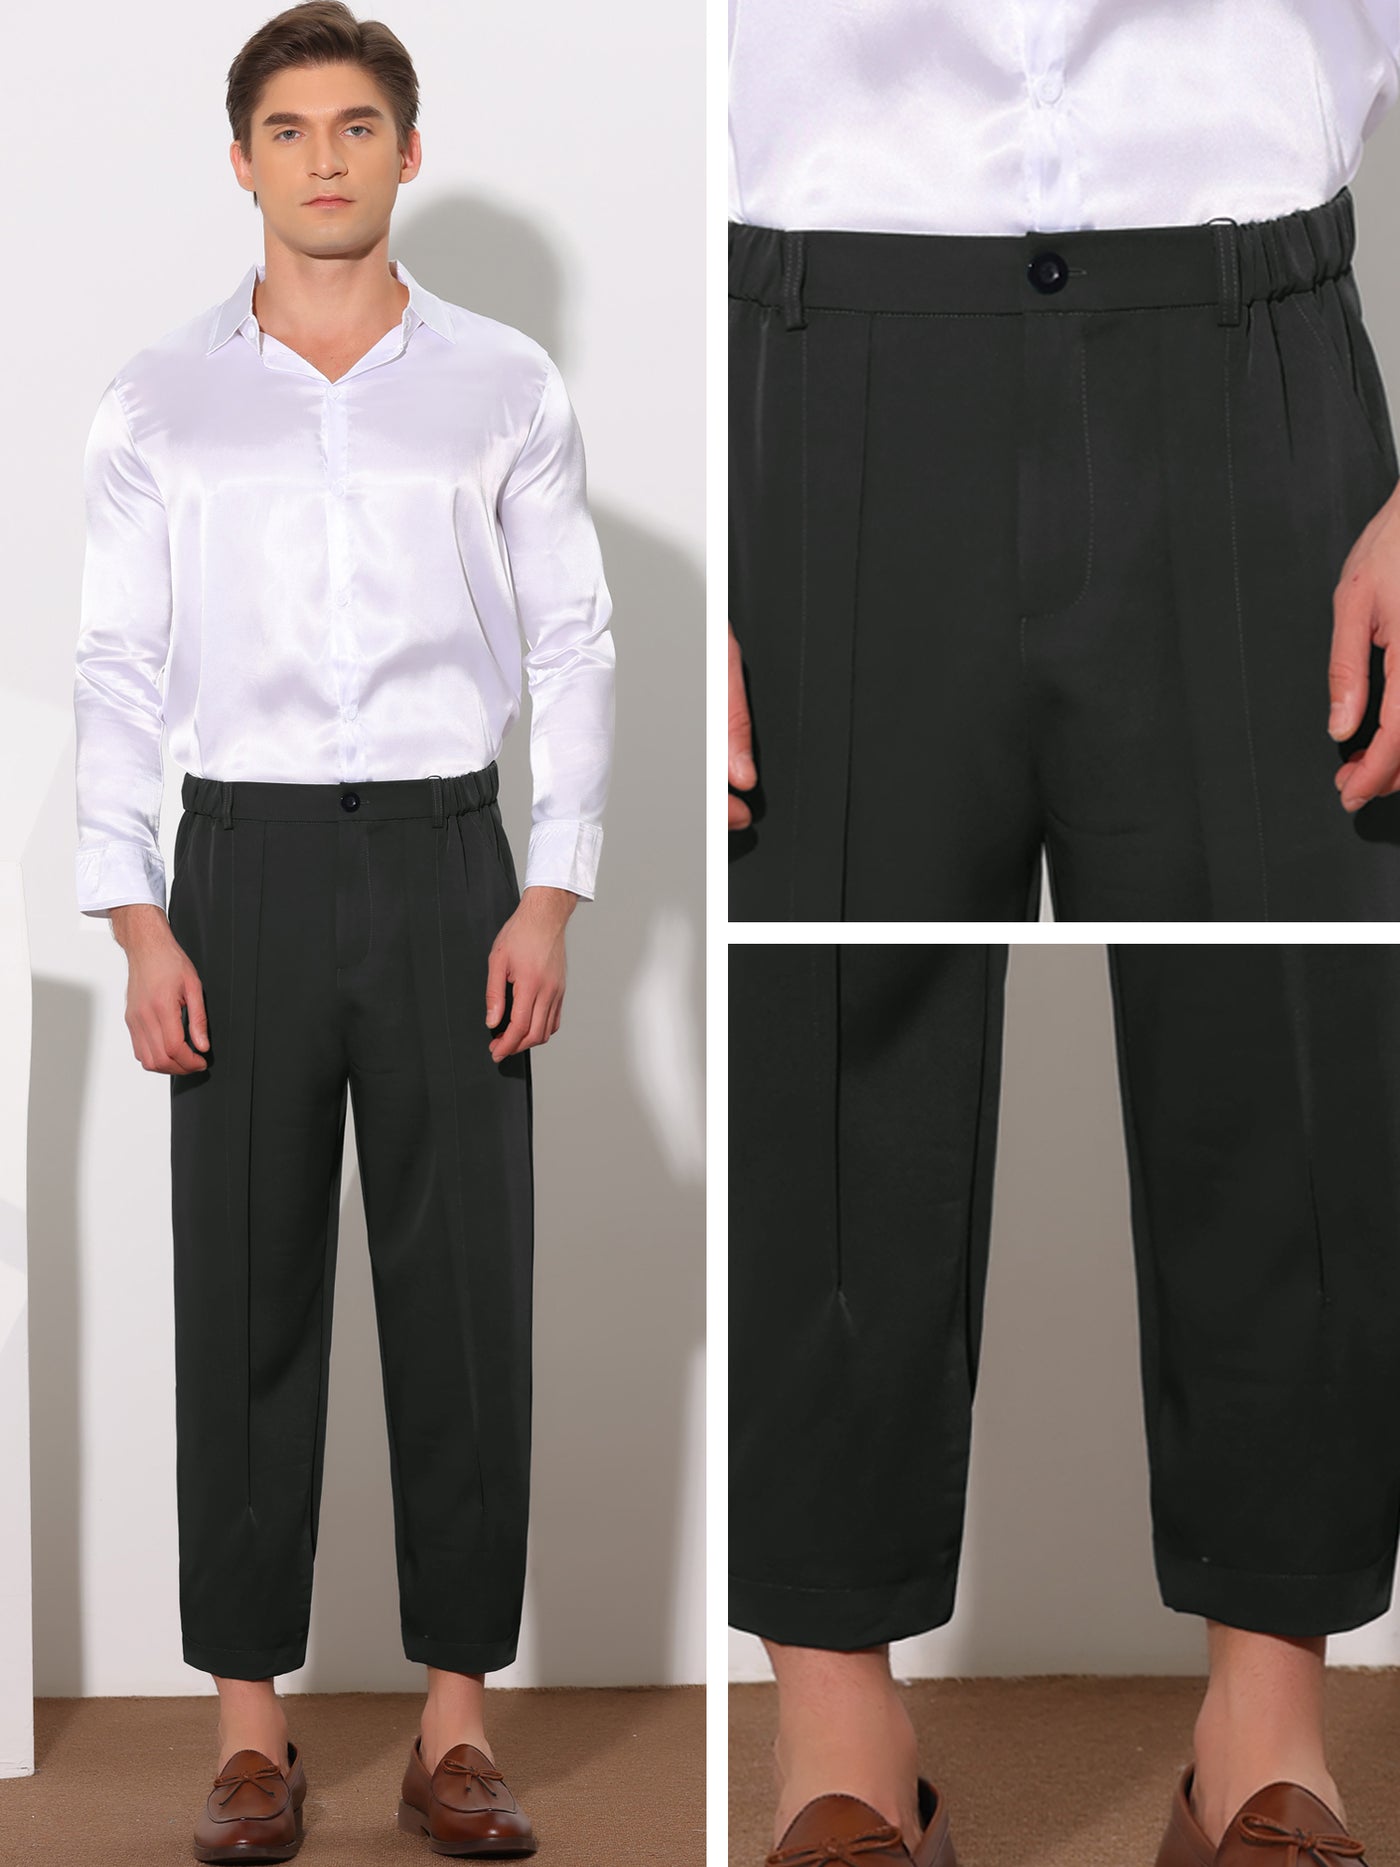 Bublédon Men's Solid Color Elastic Waist Ankle Length Tapered Cropped Dress Pants